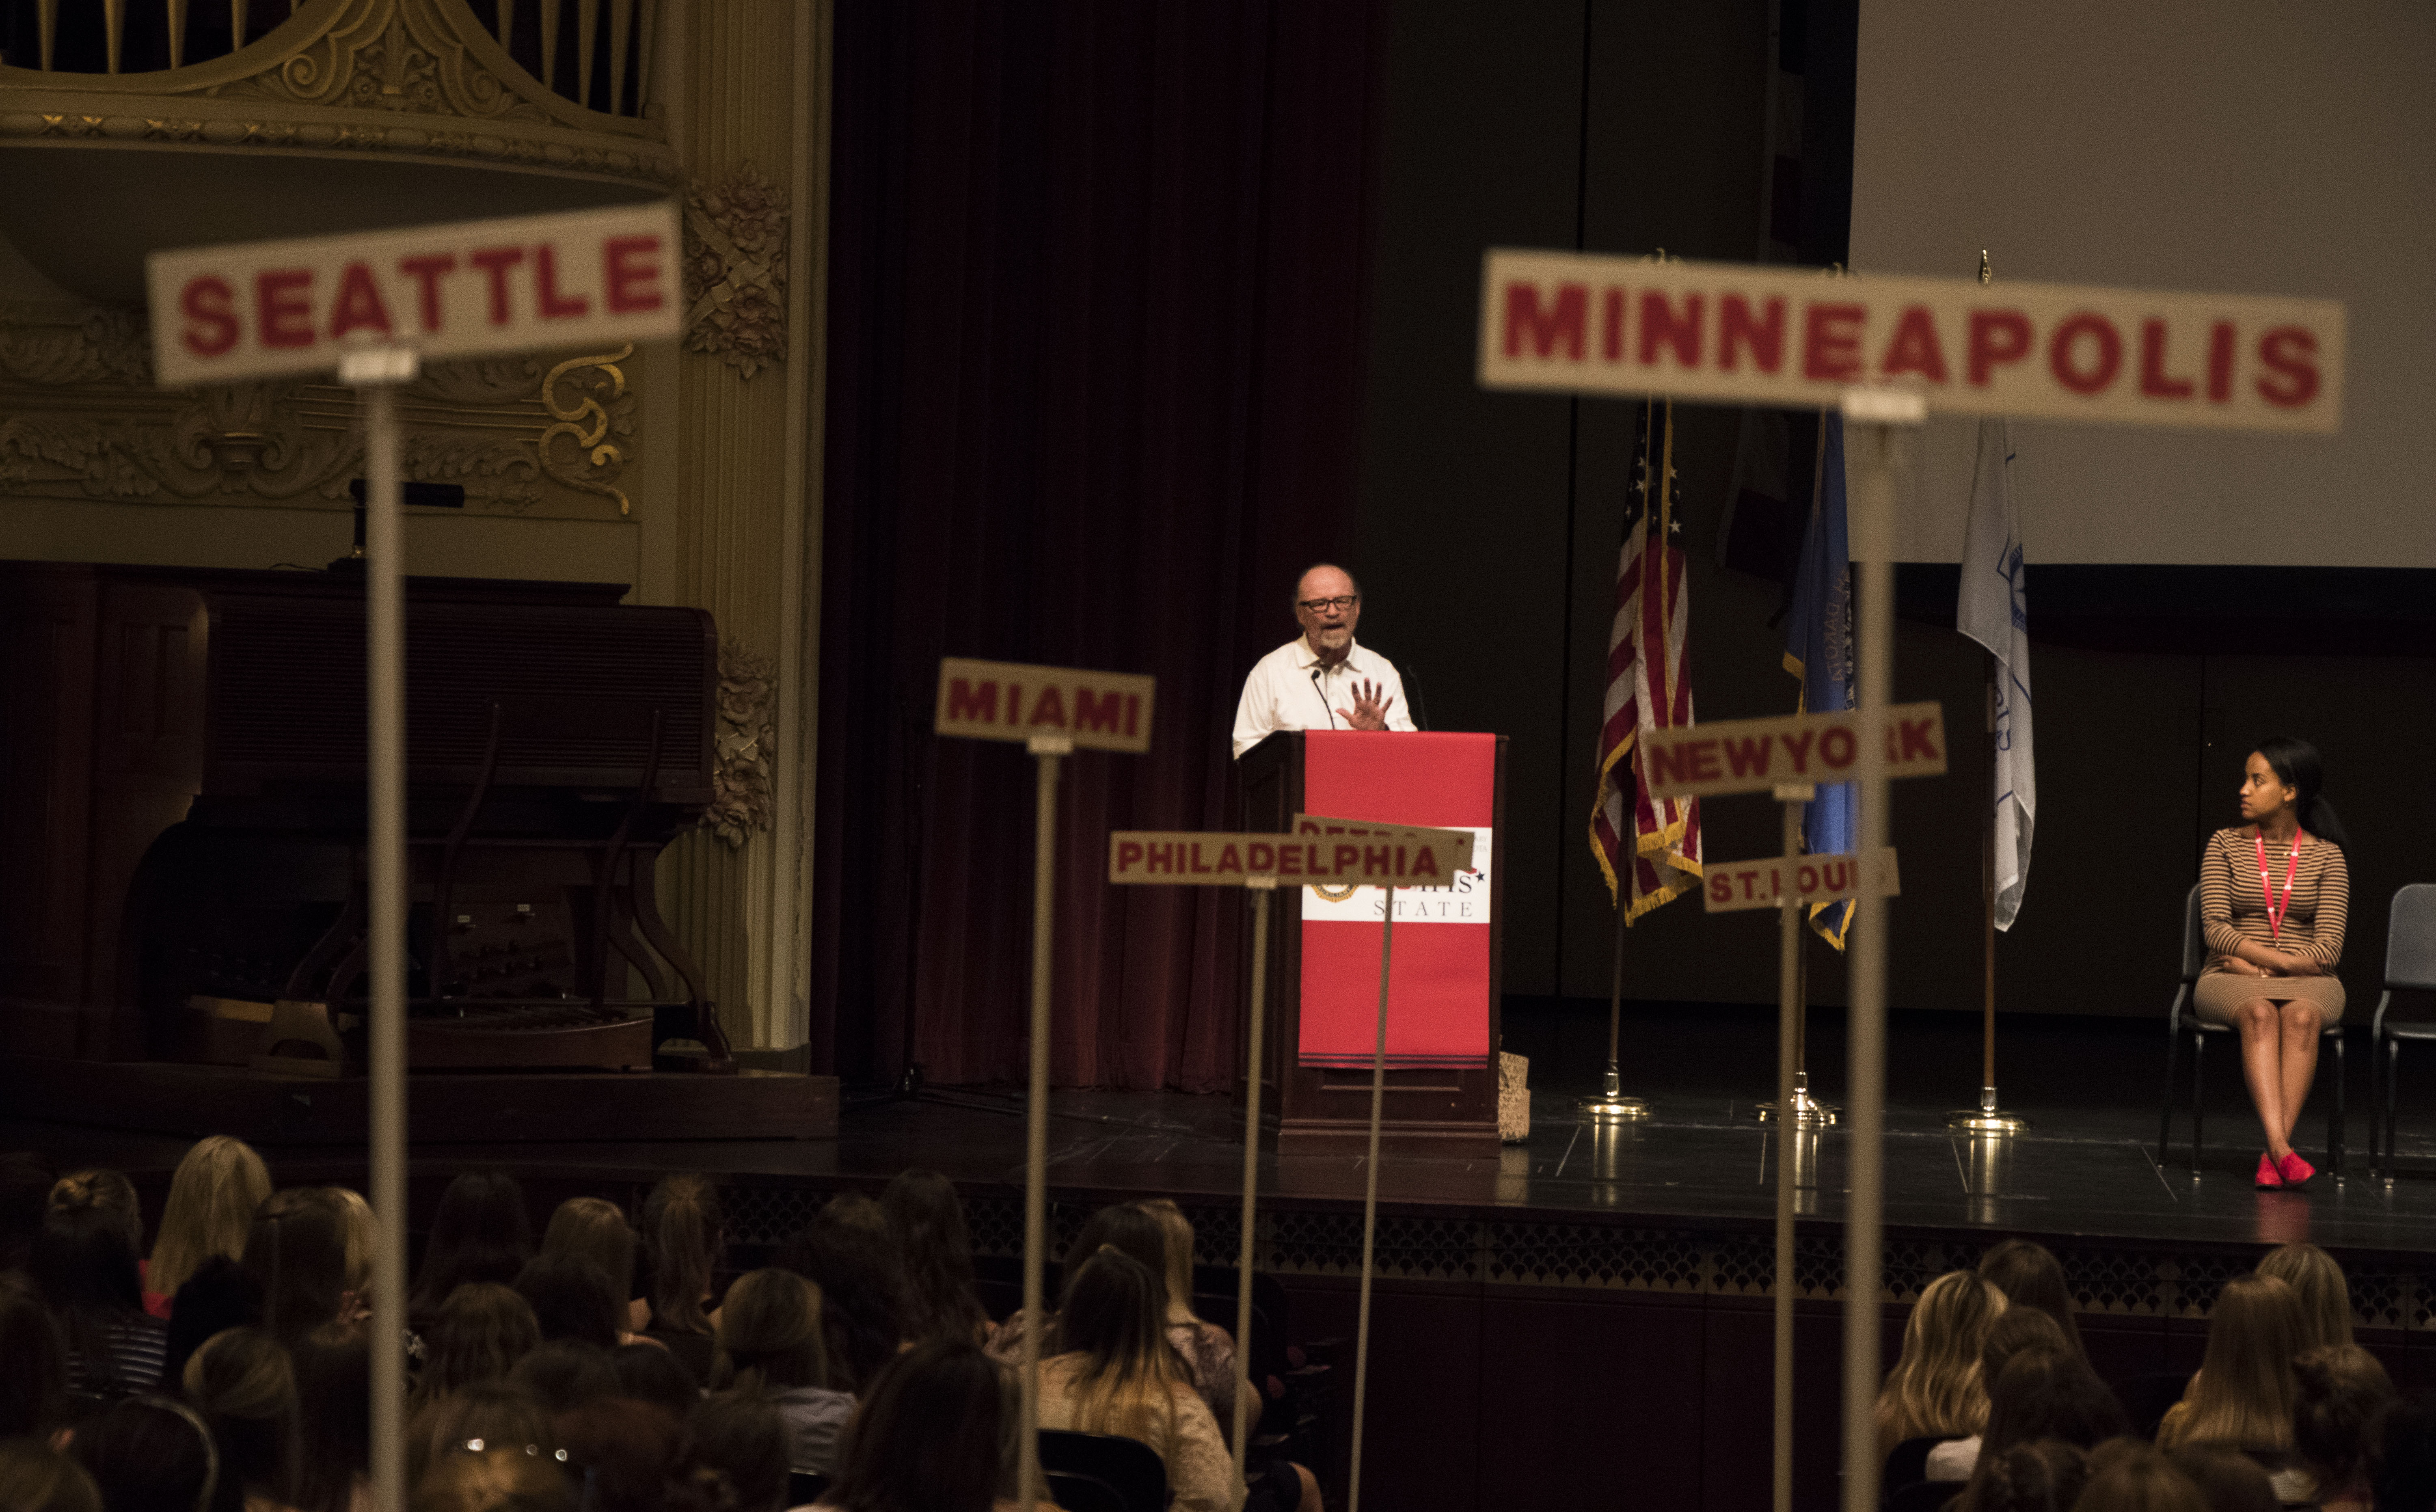 USD professor Michael Roche asks Girls State delegates to find their talents